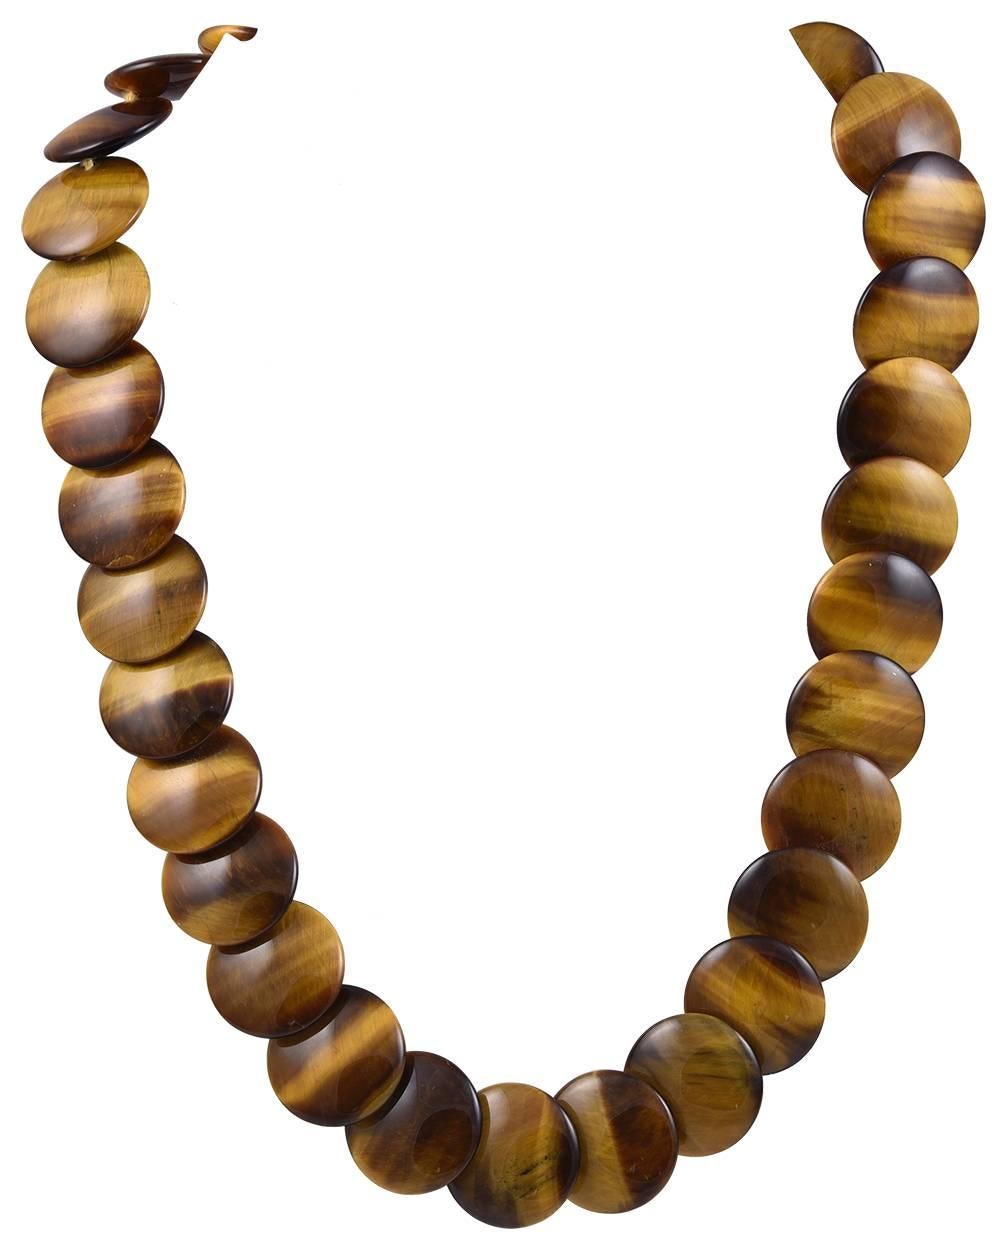 Luminous necklace.  Signed Paloma Picasso TIFFANY & CO.   Highly polished round tiger eye discs.  Gleaming tones of brown and beige.   18K yellow gold.  18